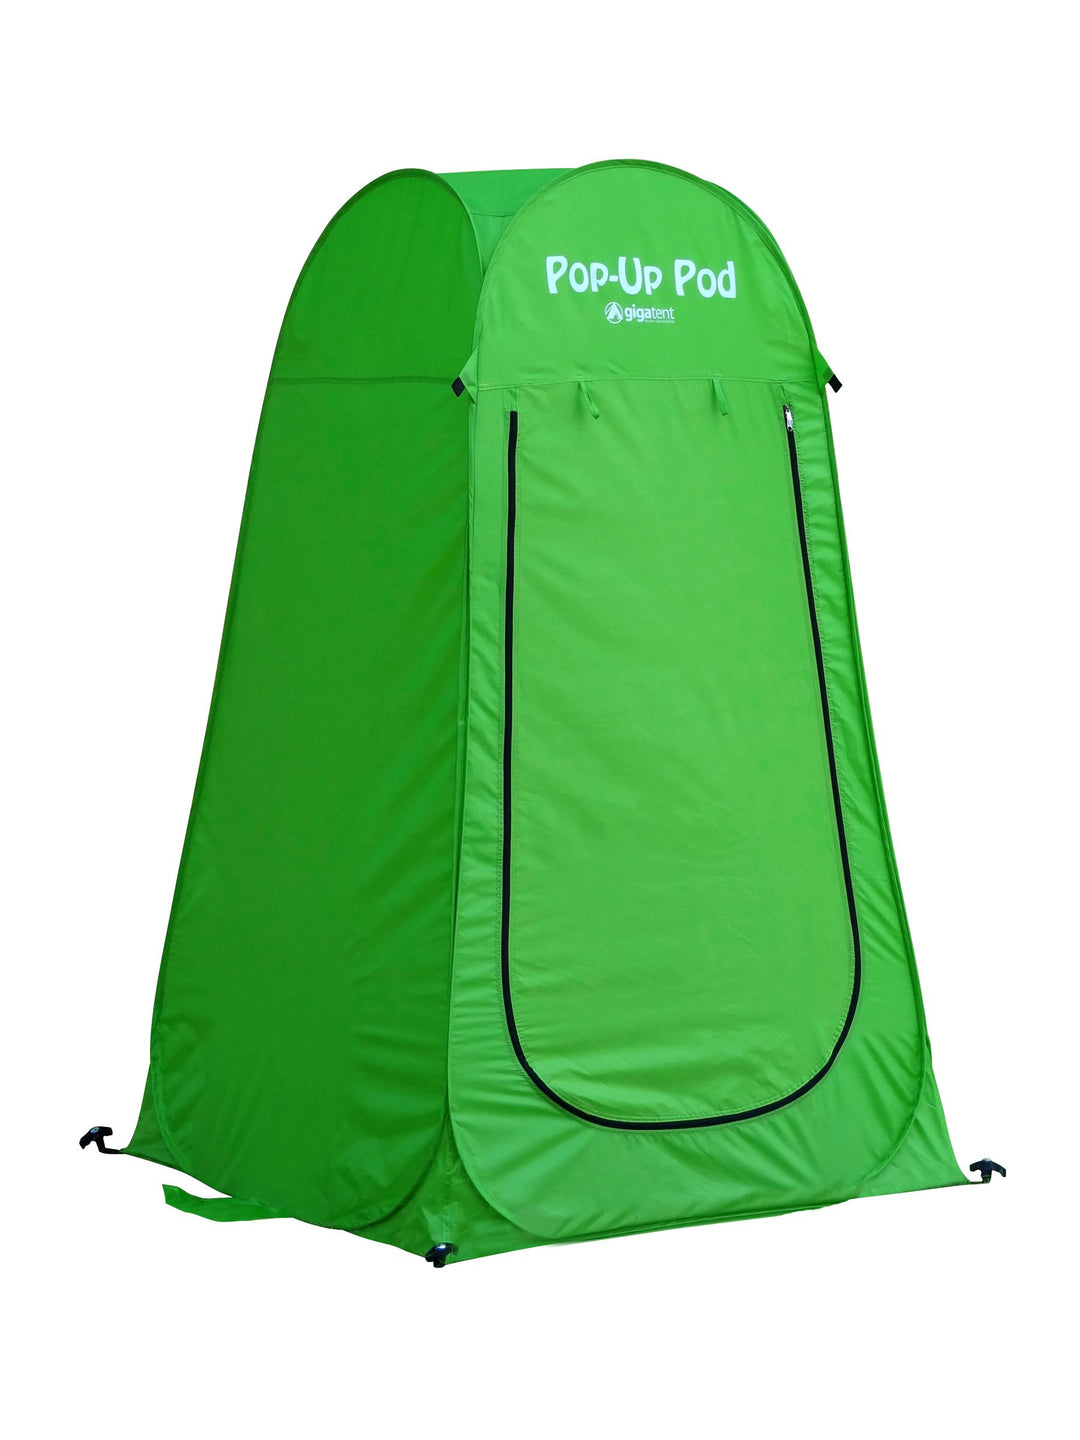 Instant Portable Outdoor Shower Tent, Camp Toilet, Rain Shelter for Camping & Beach